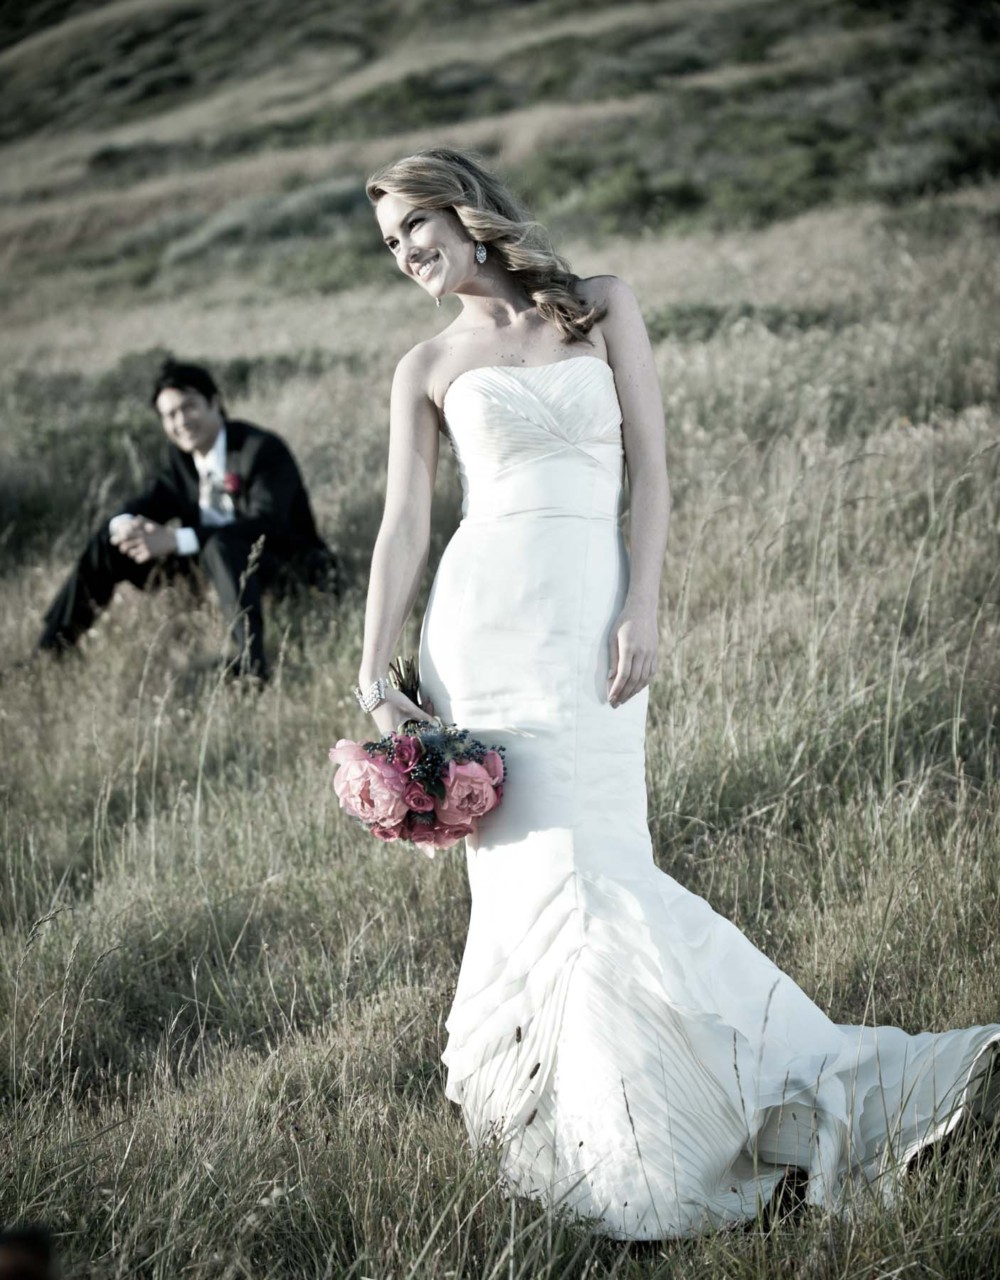 Looking for a summer wedding photographer in Alyeska?